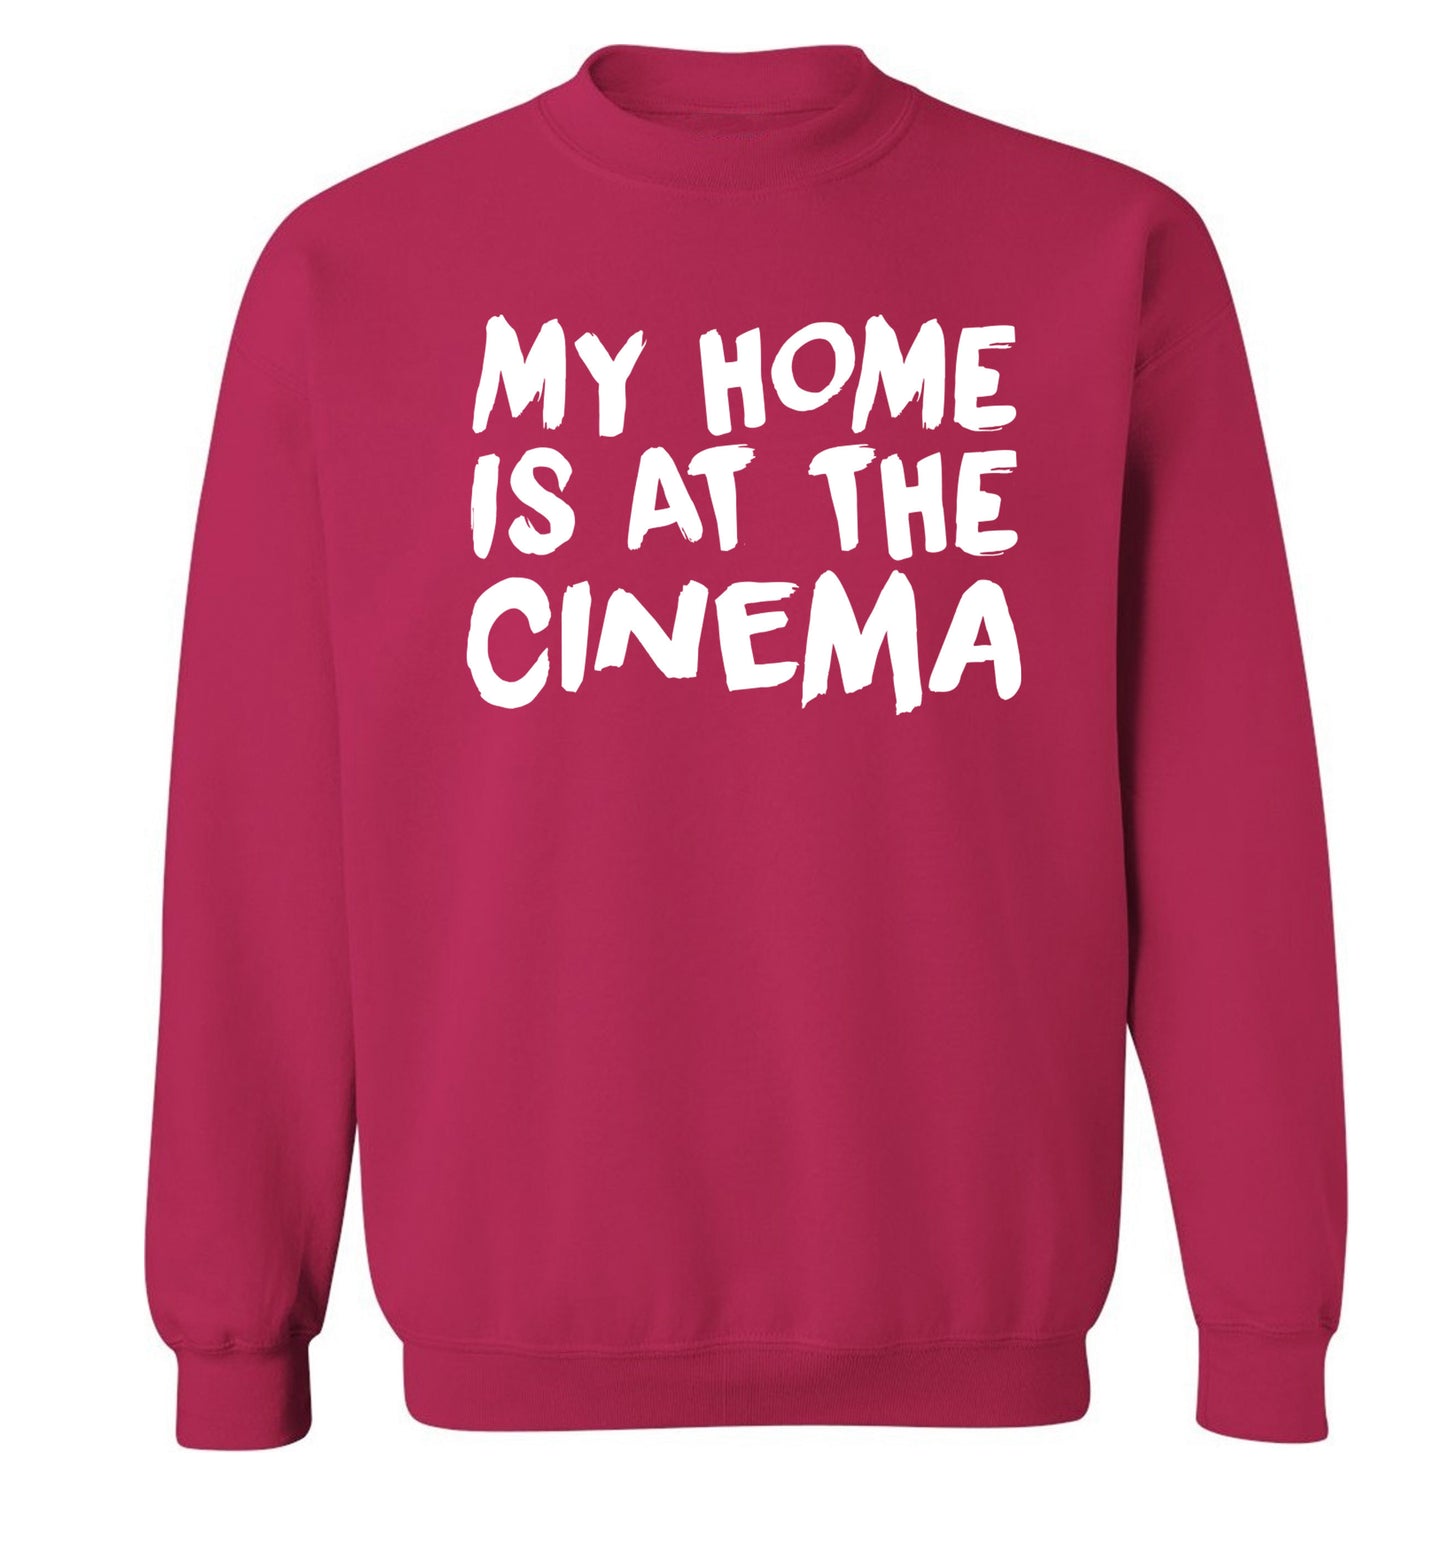 My home is at the cinema Adult's unisex pink Sweater 2XL